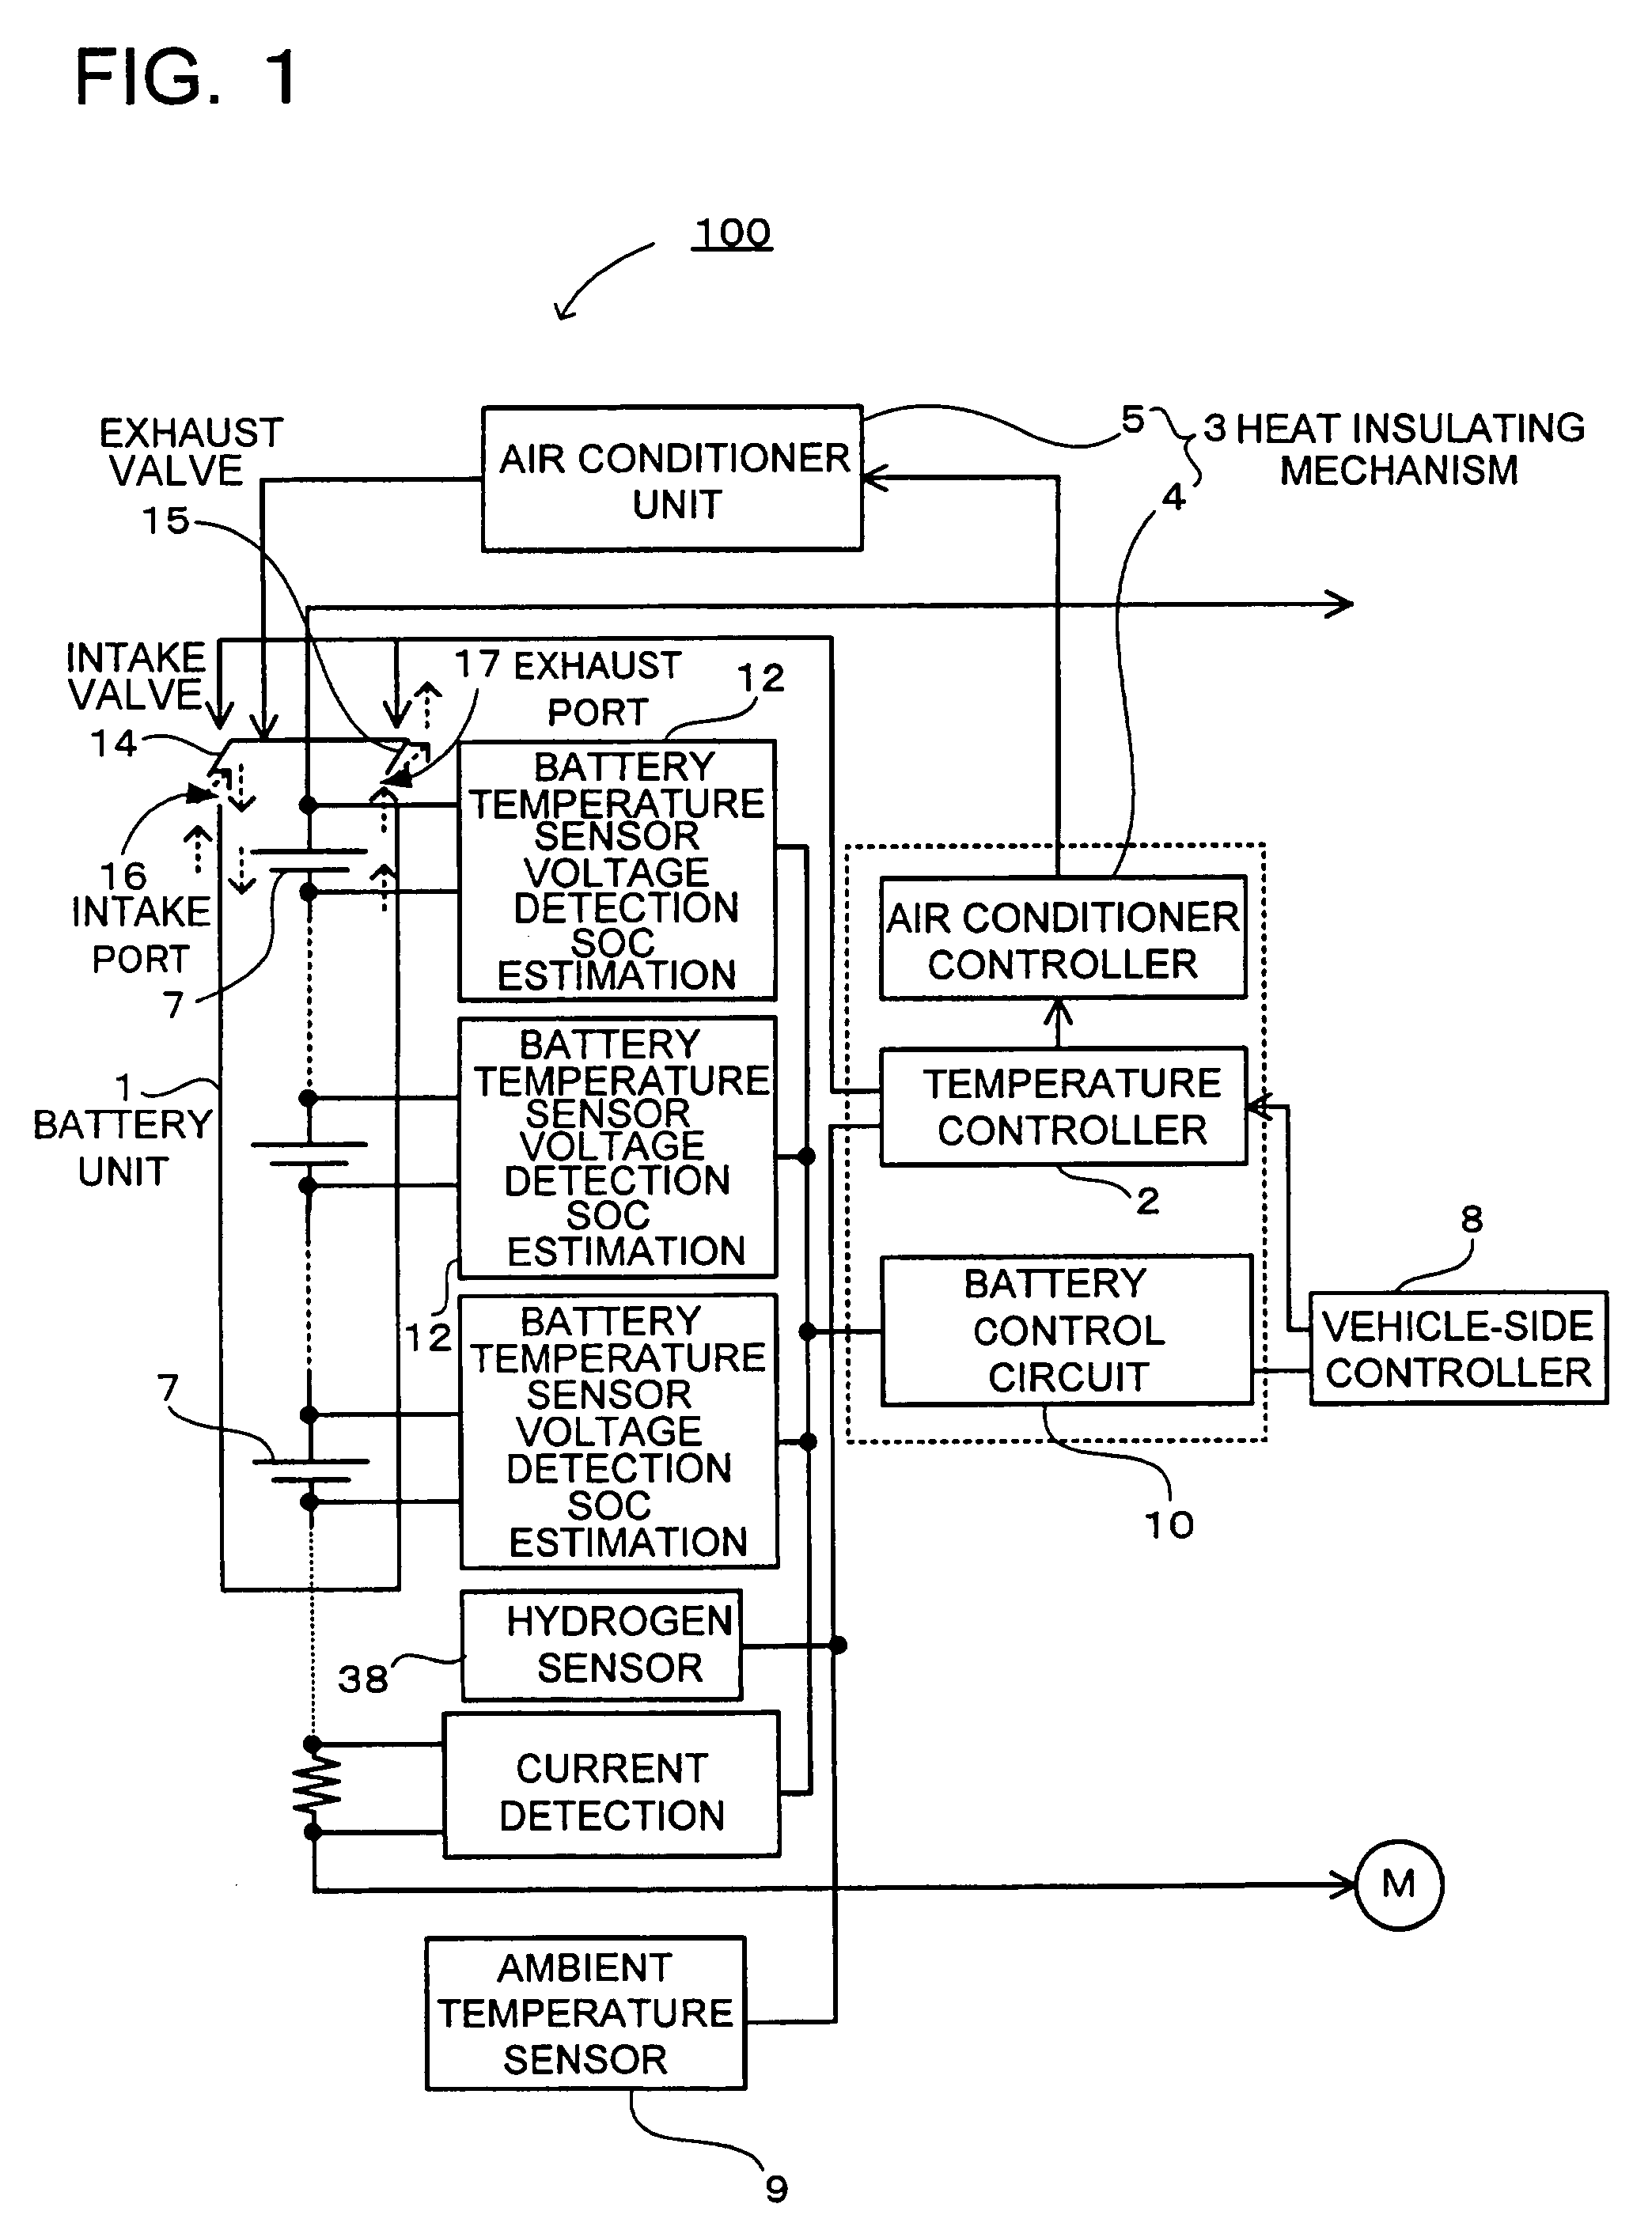 Power supply device for vehicle